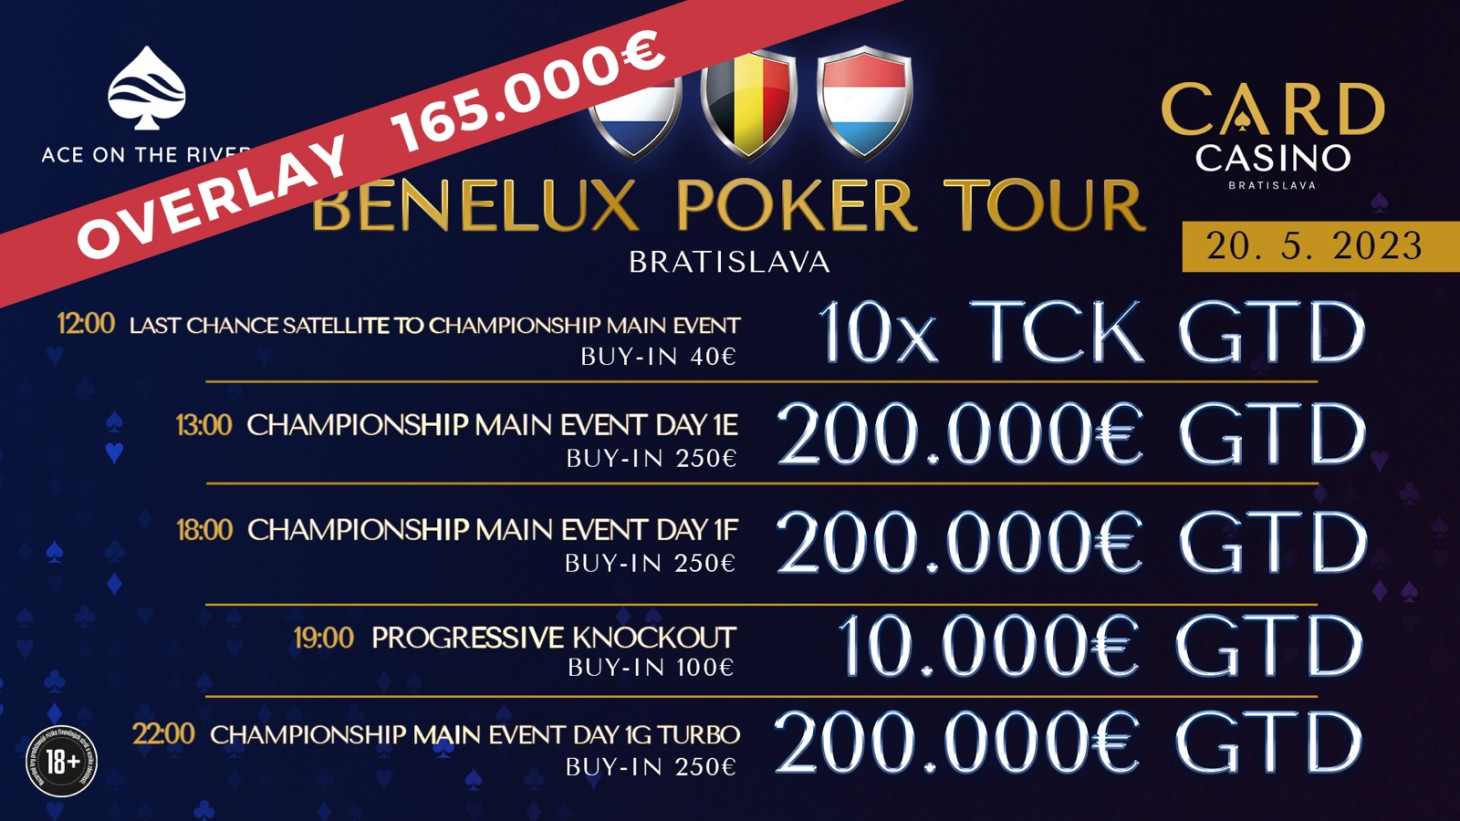 Benelux Poker Tour heads to Cardo with €200,000 GTD